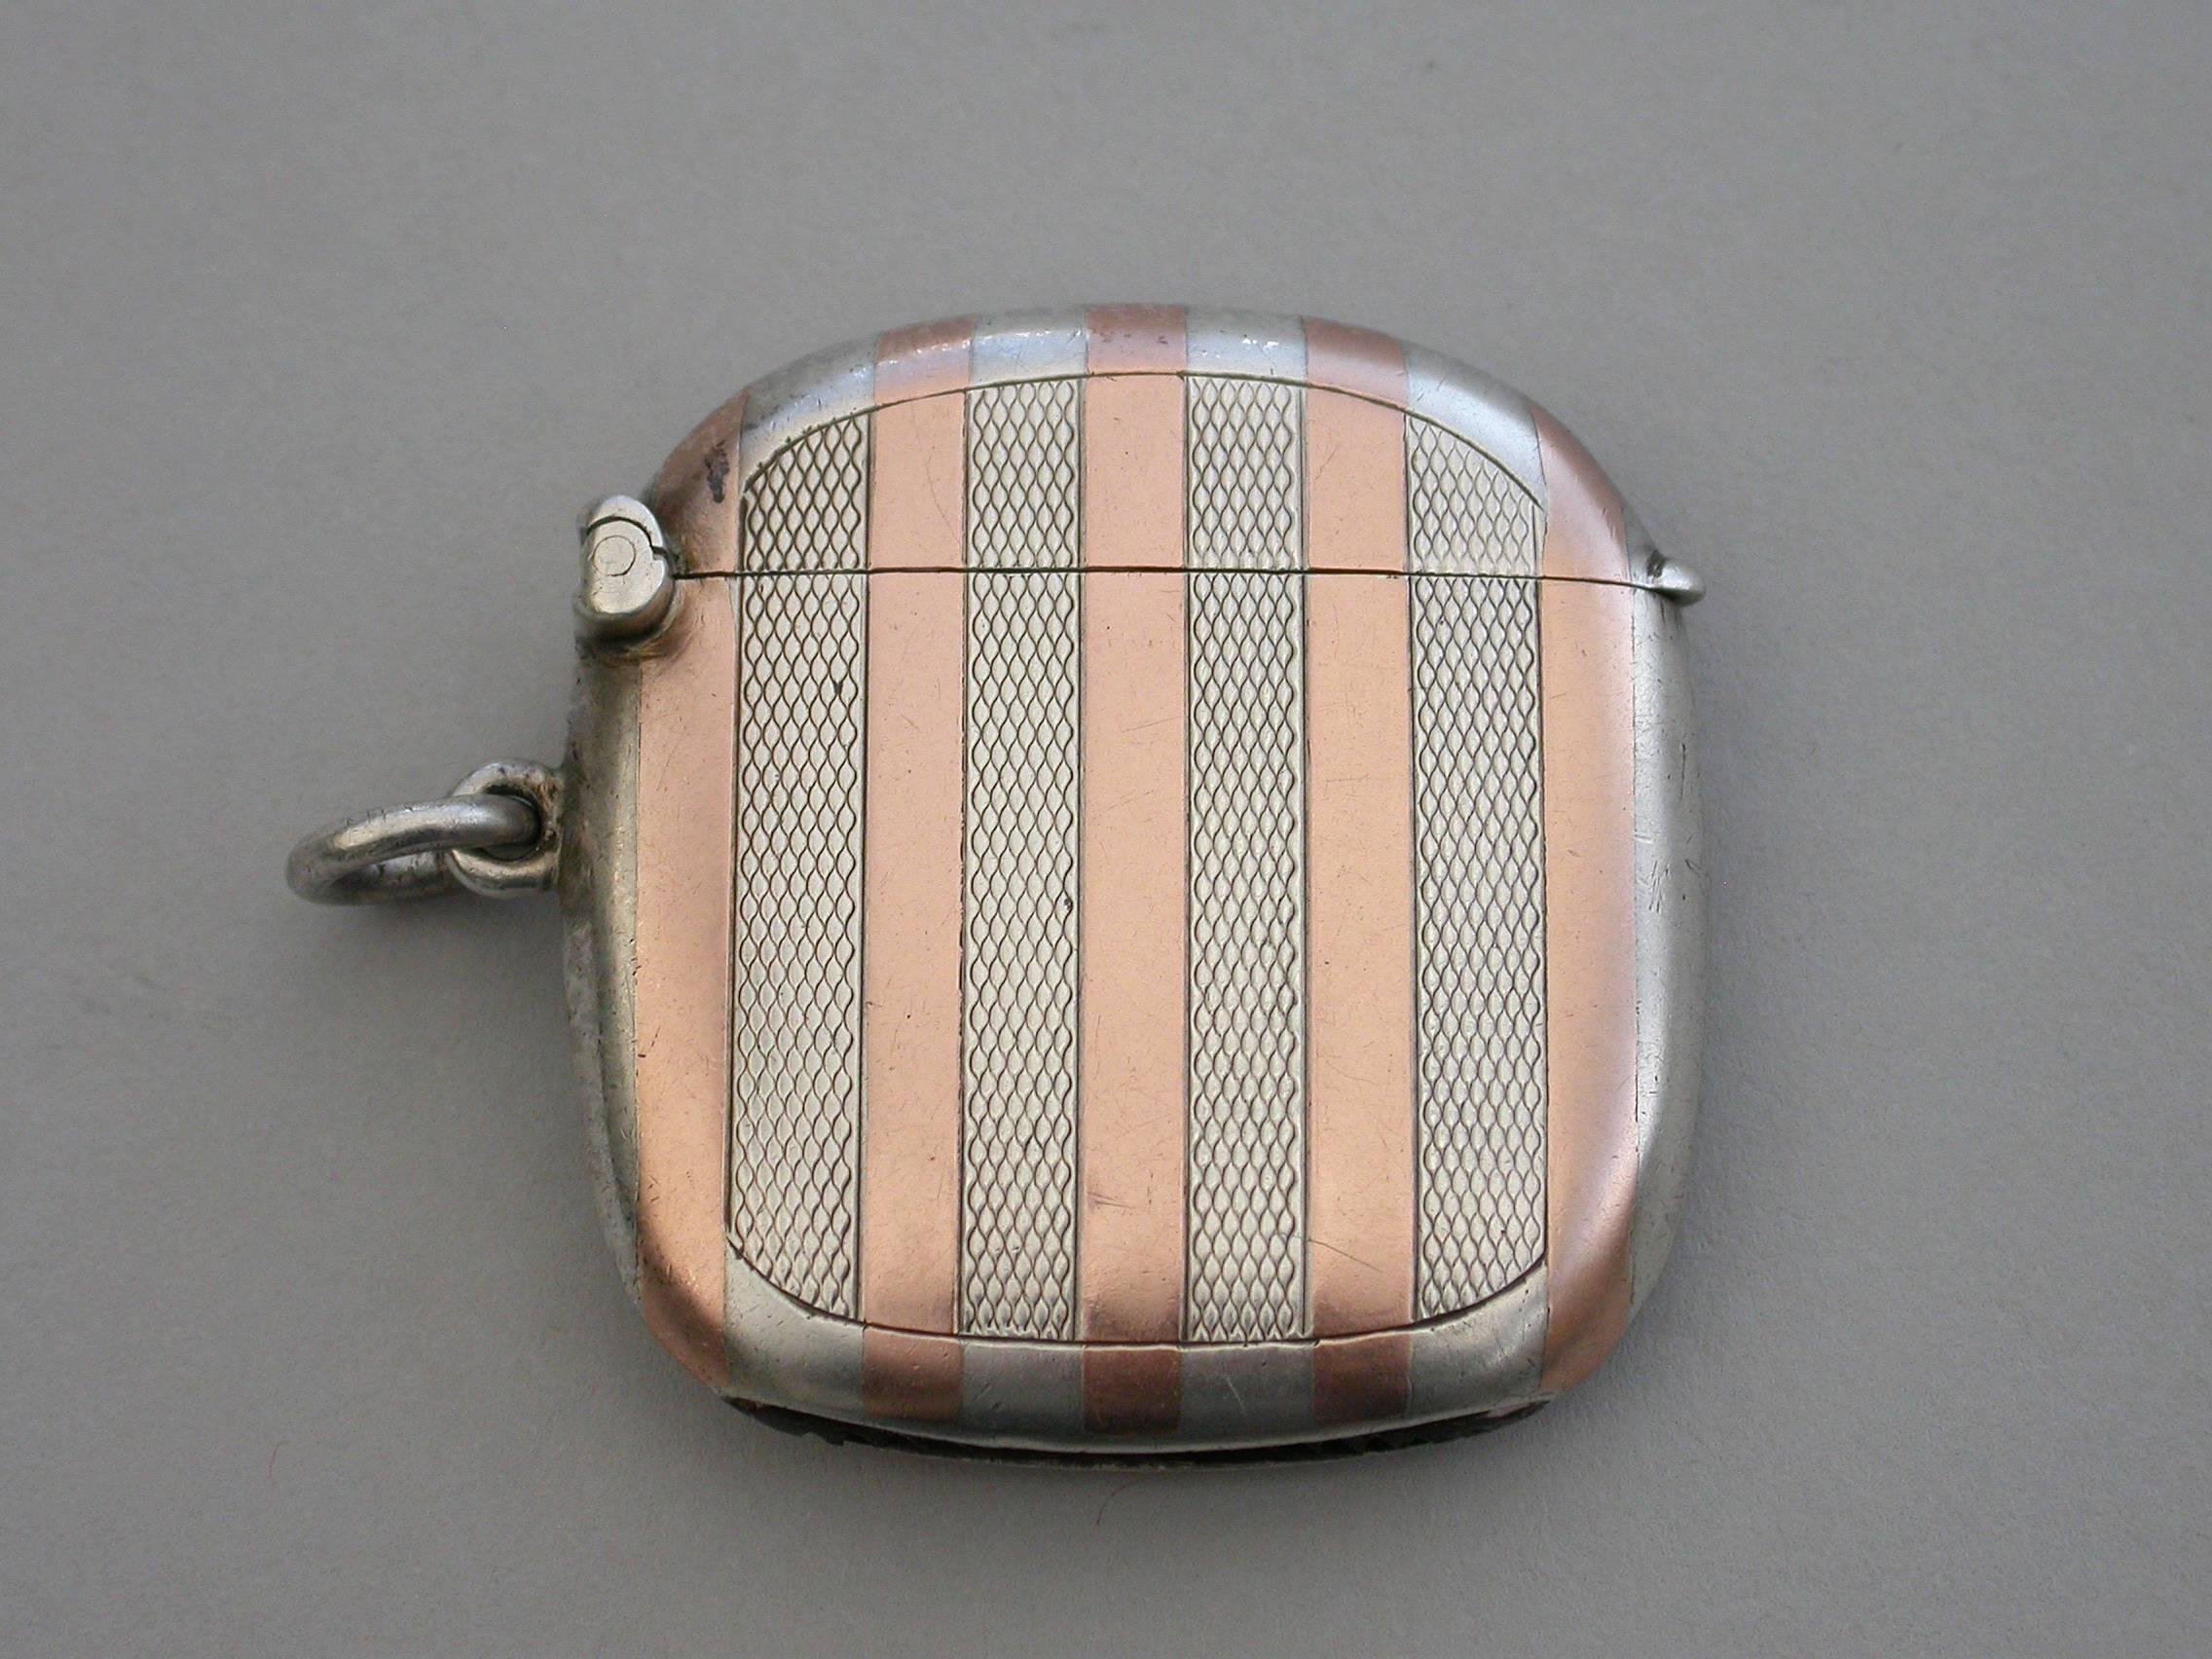 A good early 20th century silver and rose gold vesta case of rounded rectangular form with sprung hinged lid and attached suspension ring, the body decorated with stripes of rose gold and engine turned silver.

By Sampson Mordan & Co, Chester